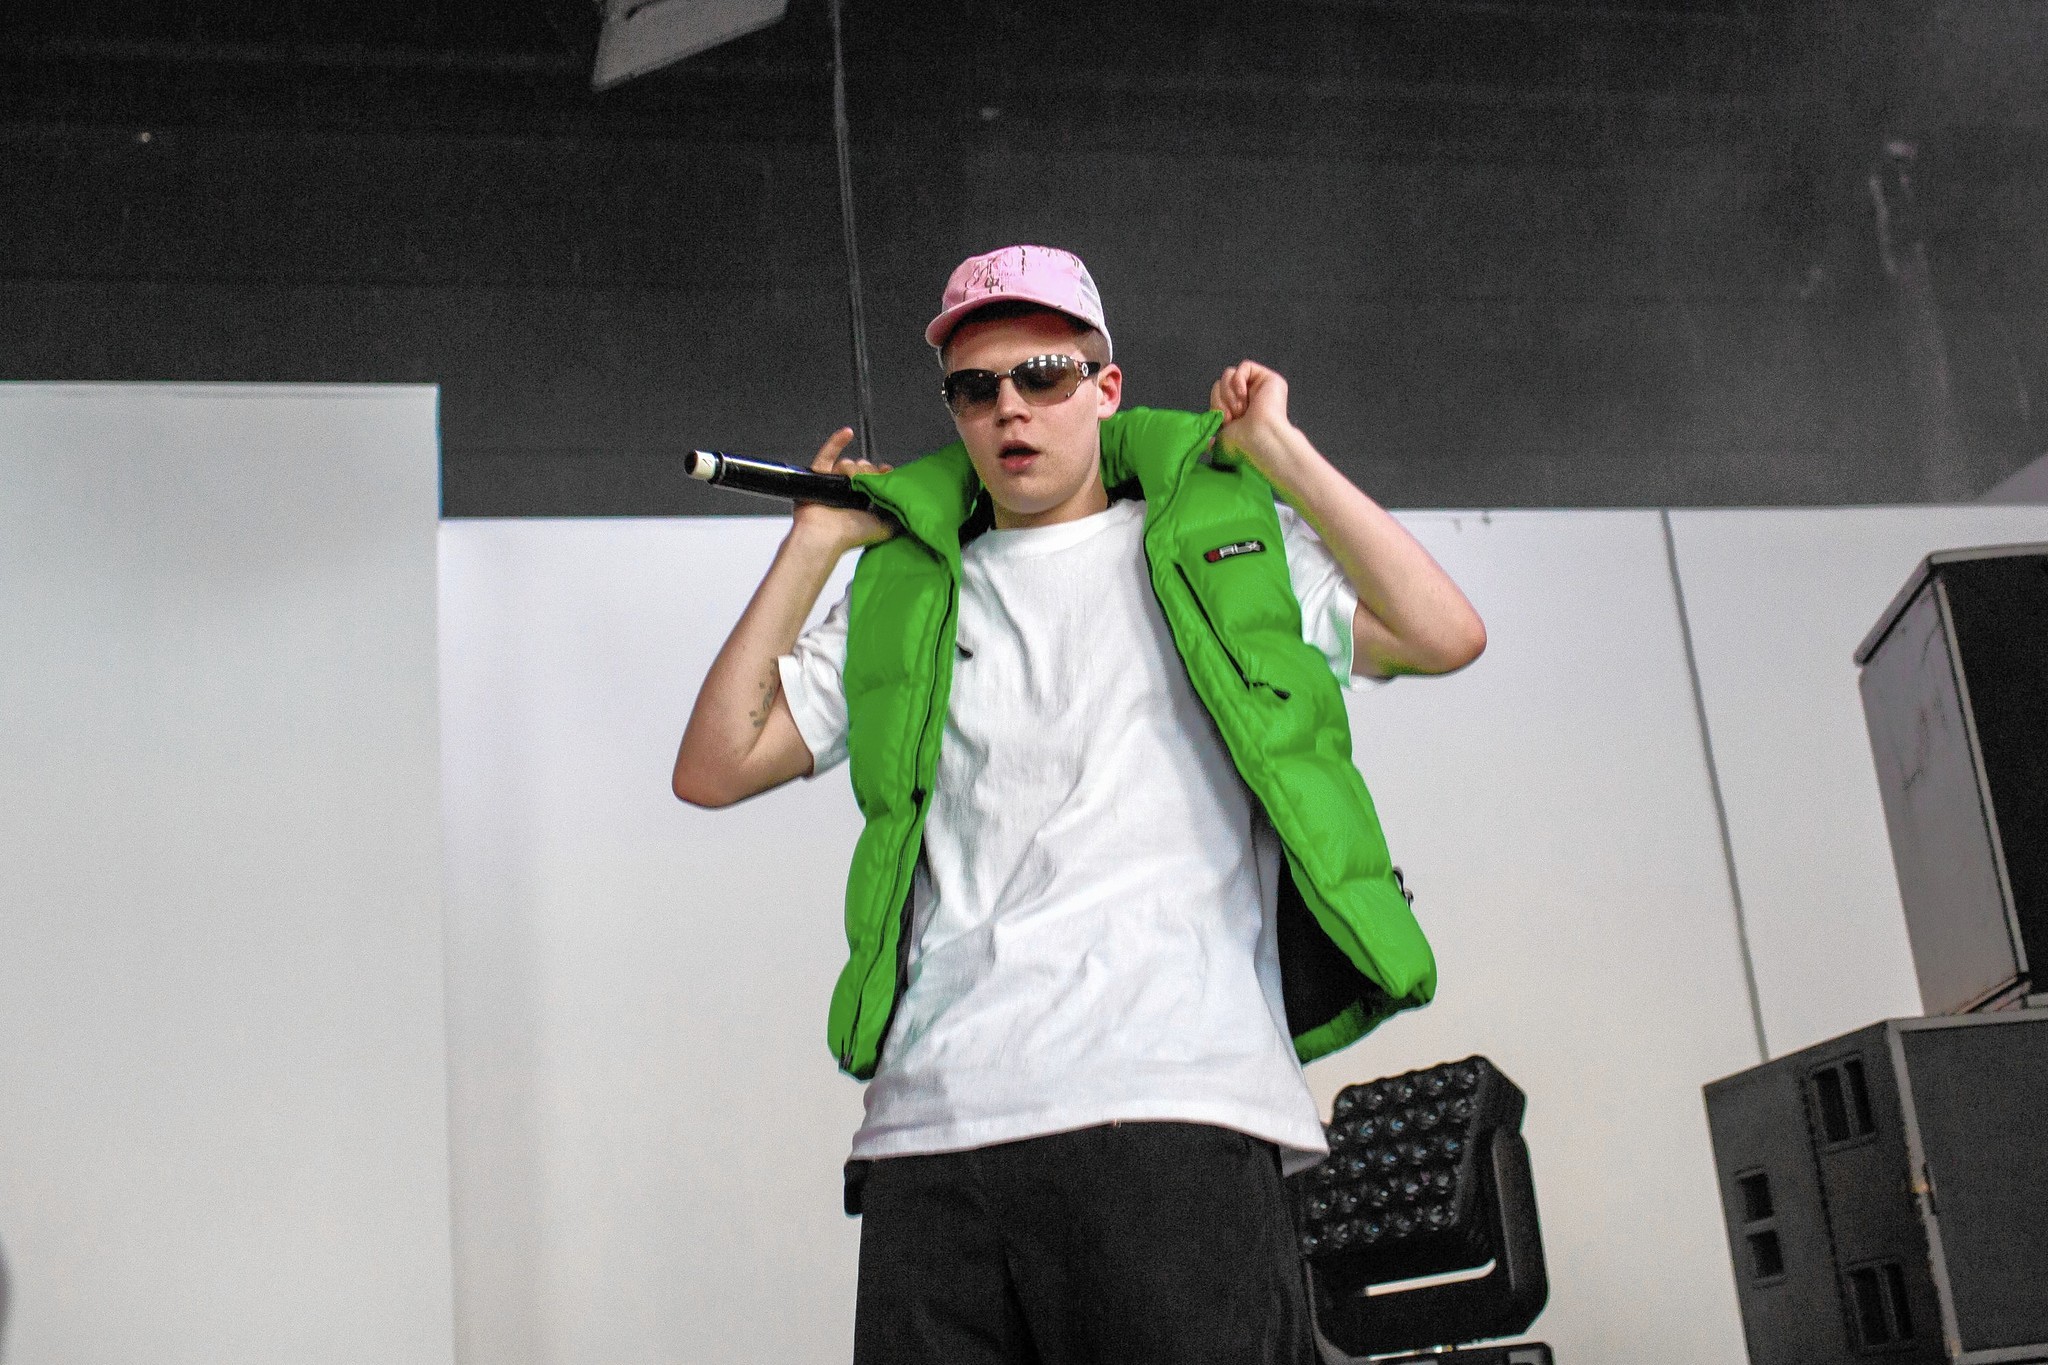 Yung Lean is, at present, having a moment - Chicago Tribune2048 x 1365